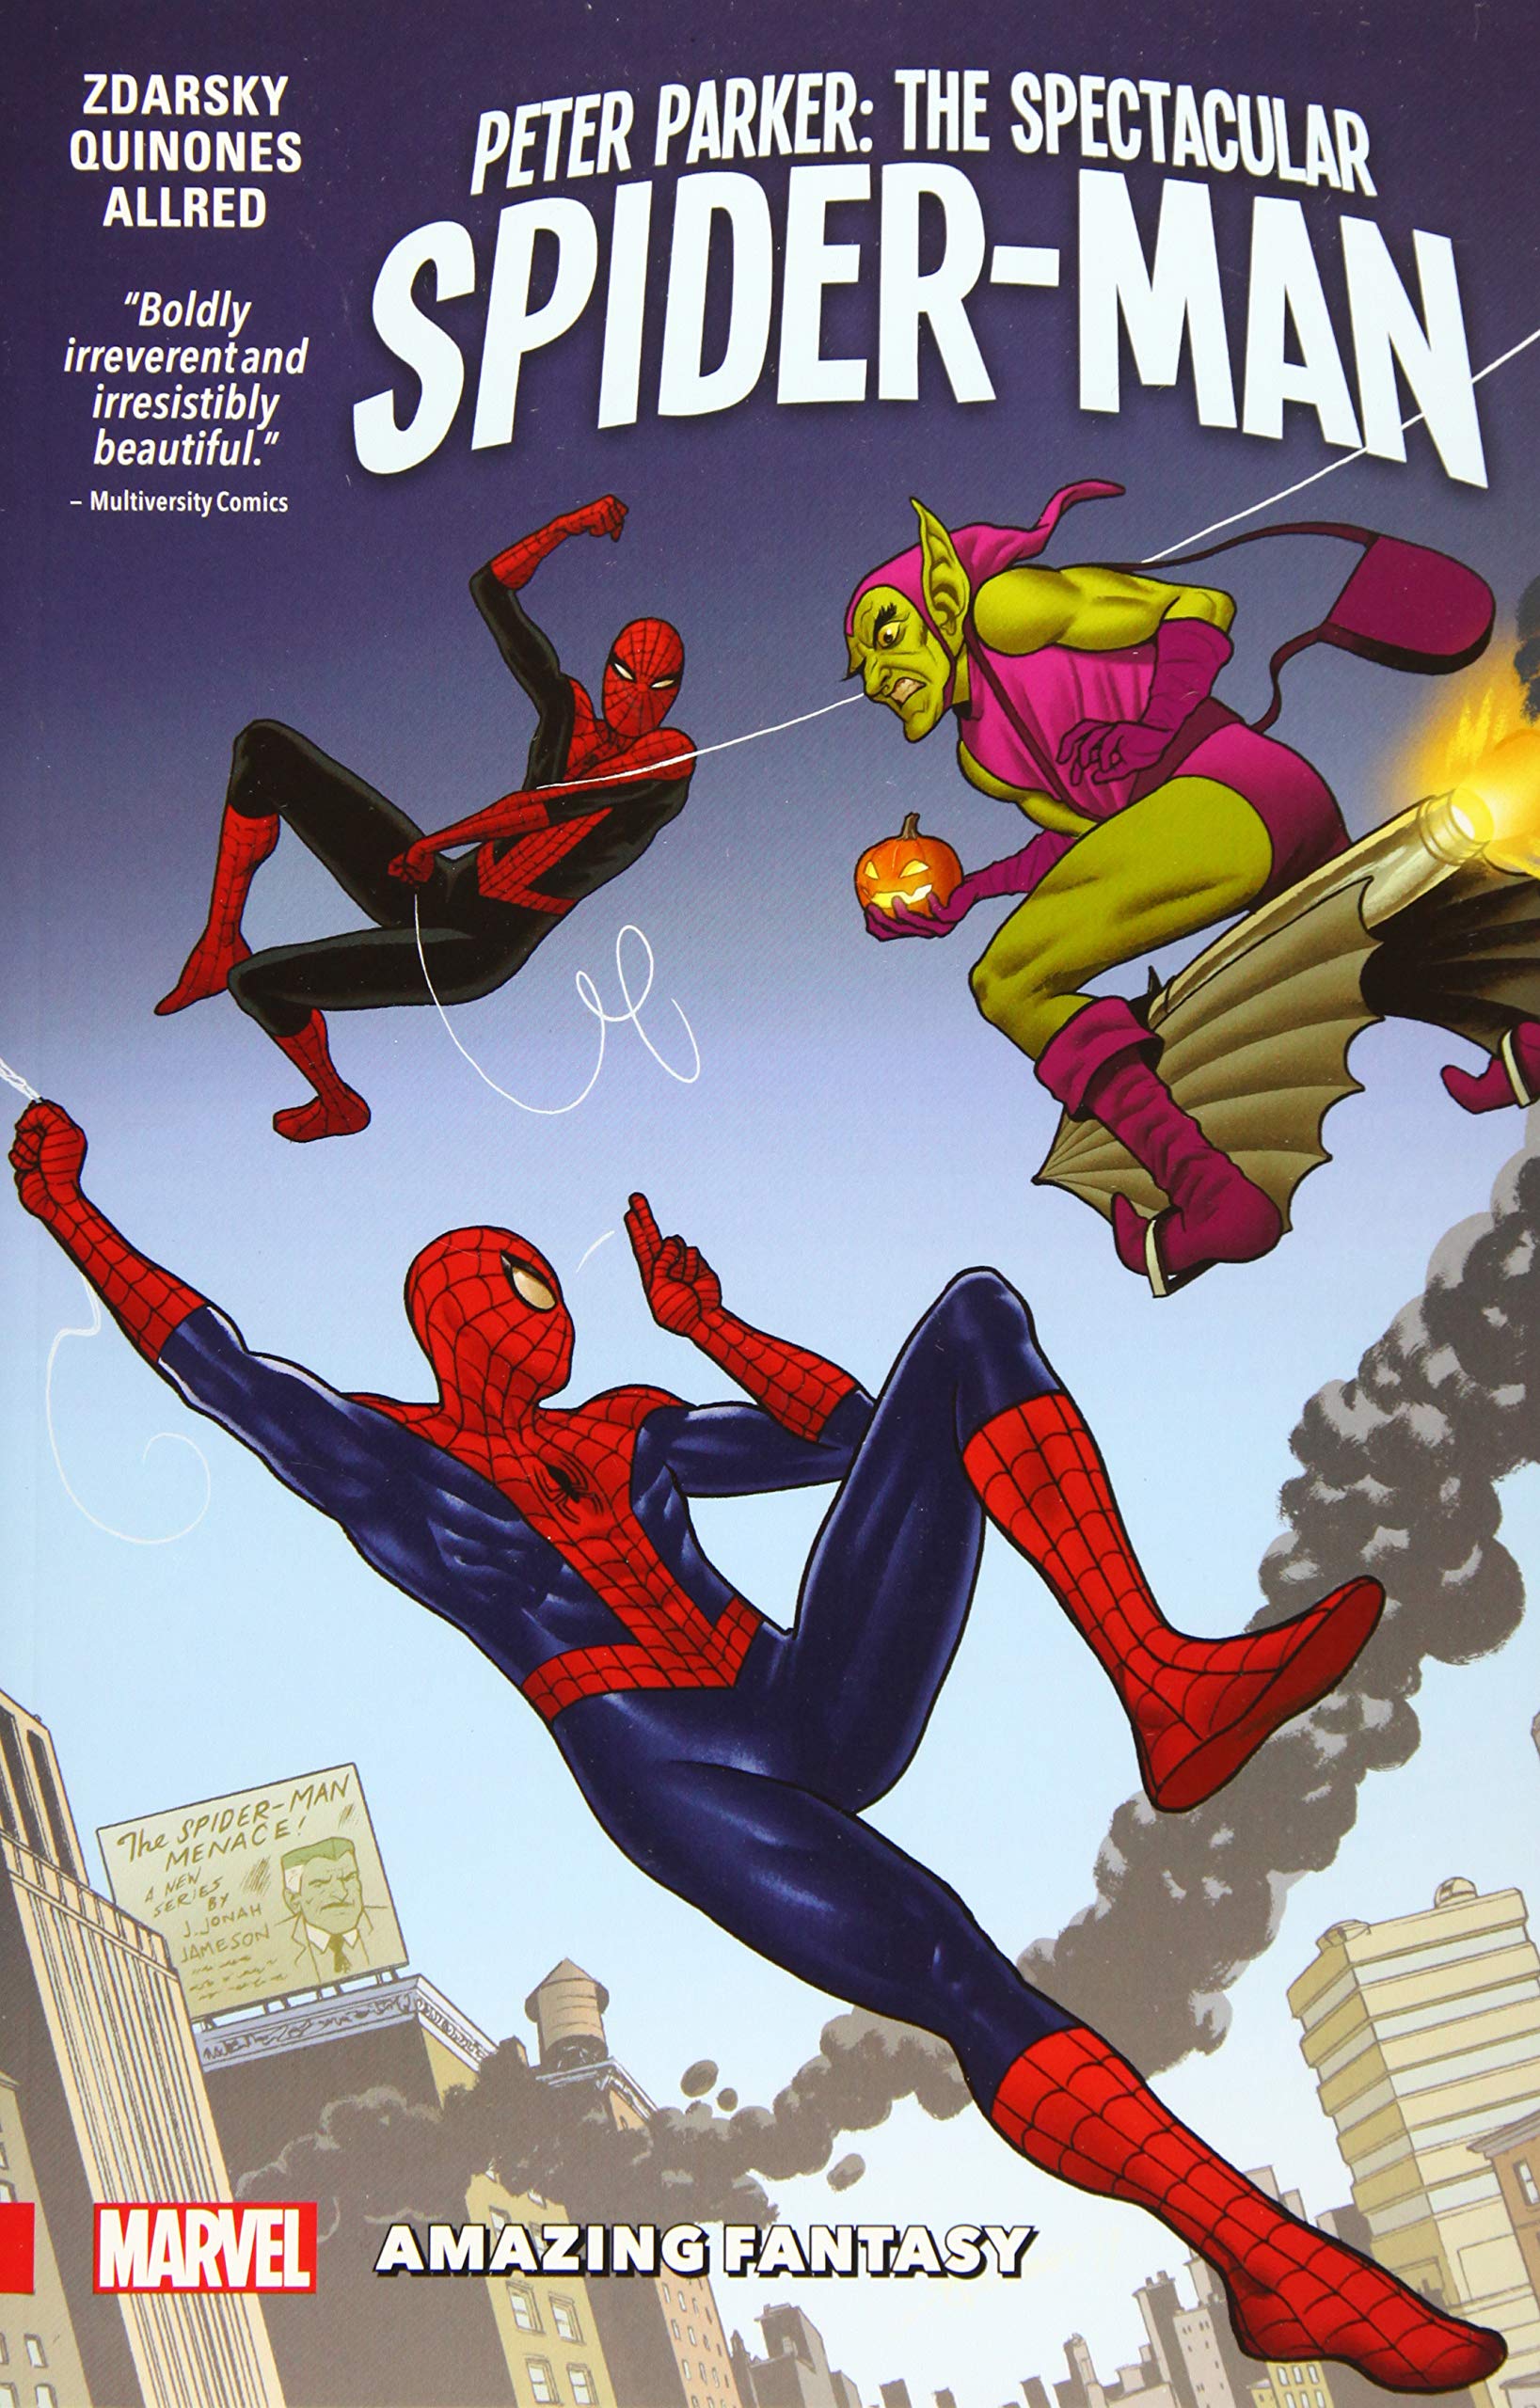 Peter Parker: The Spectacular Spider-Man Vol. 3: Amazing Fantasy